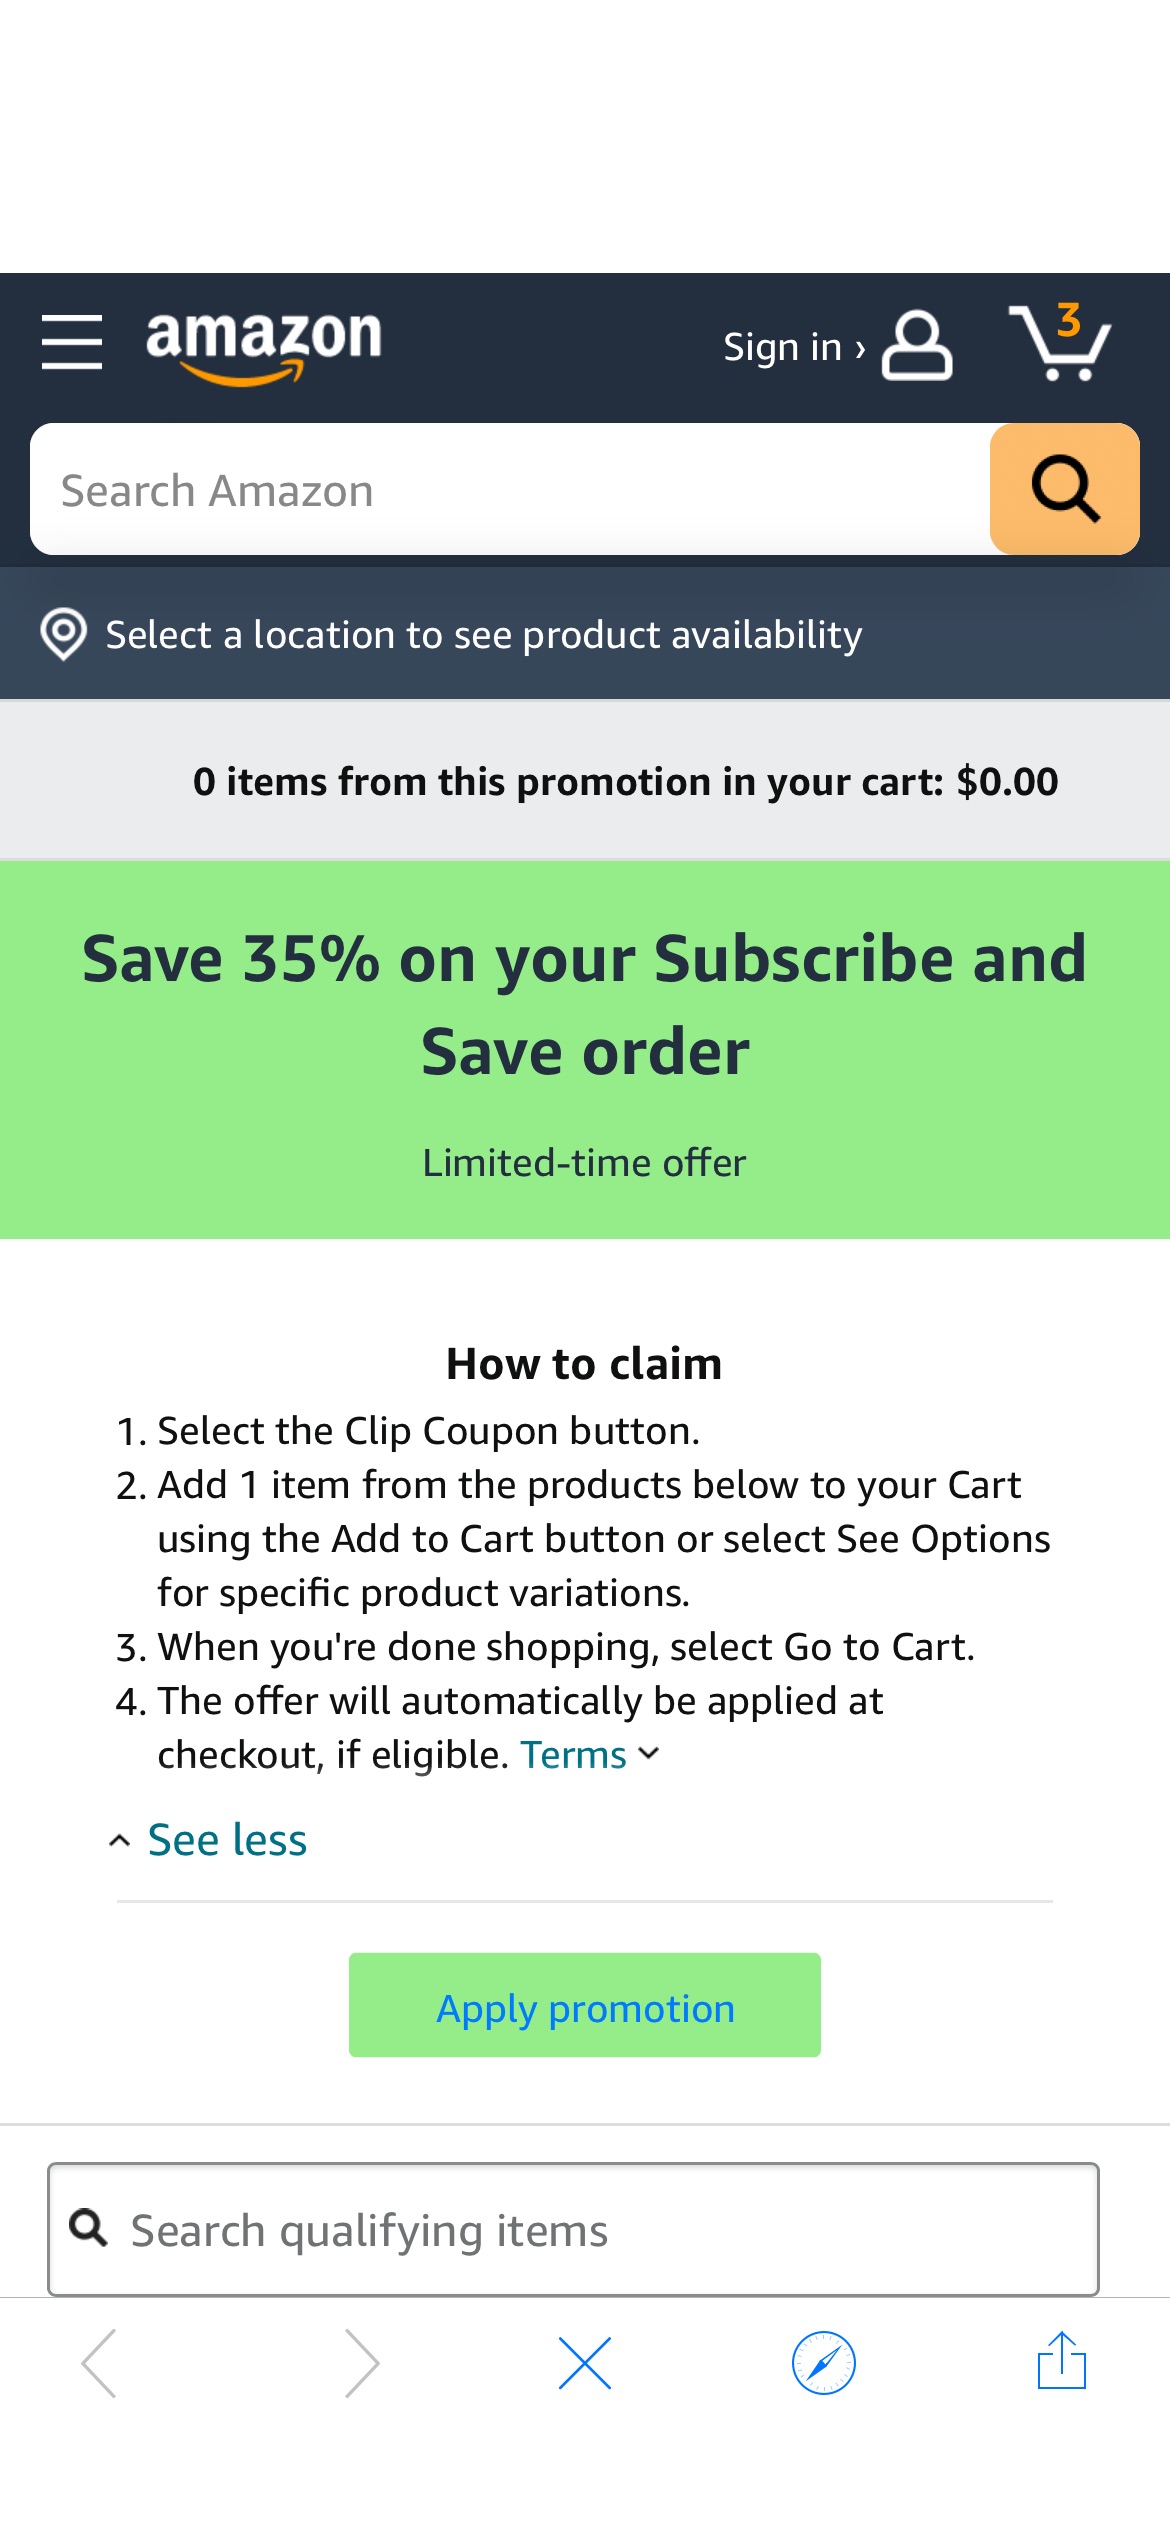 Amazon.com: Save 35% on your Subscribe and Save order promotion